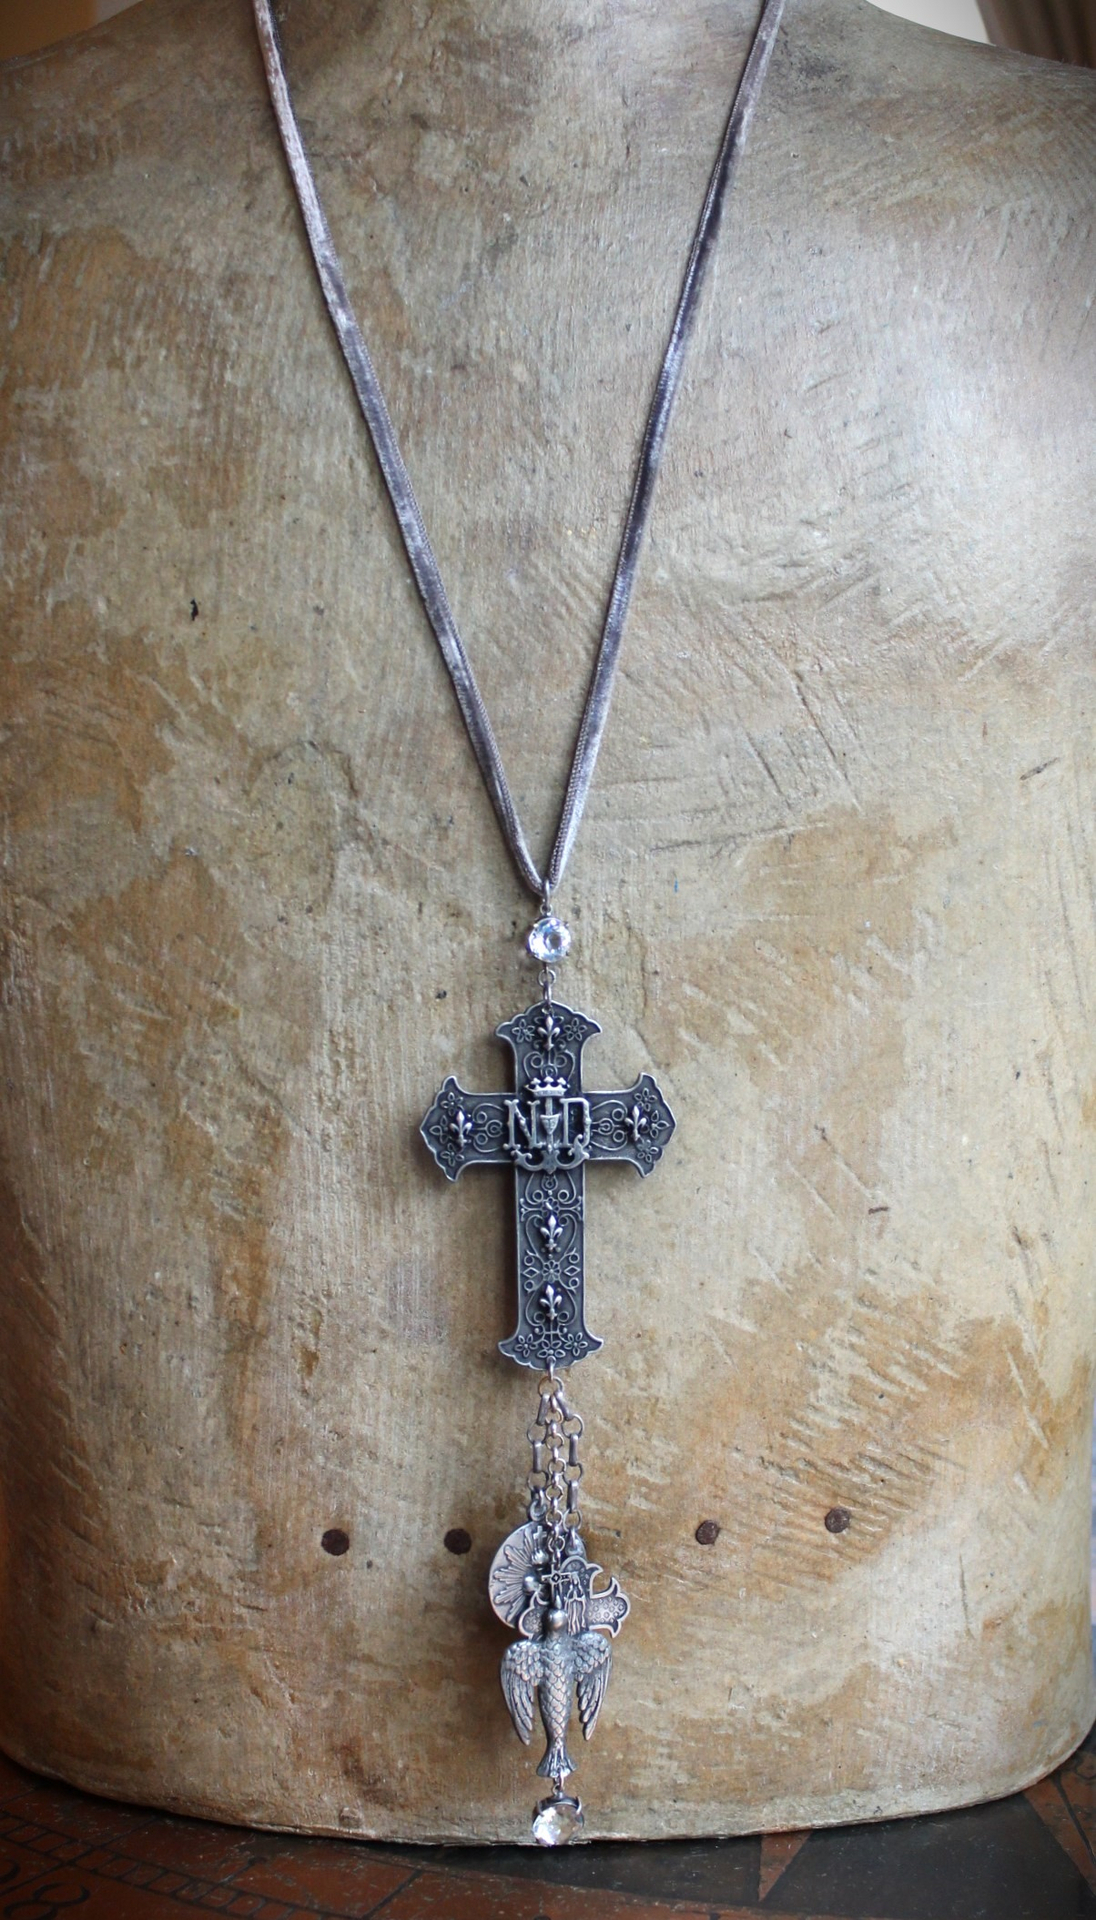 Rare Notre Dame Cross Necklace with Dove of Peace, Sacred Heart,4 Way Marian Cross Medals,Faceted Rock Crystals,Antique Silk Velvet  Chain